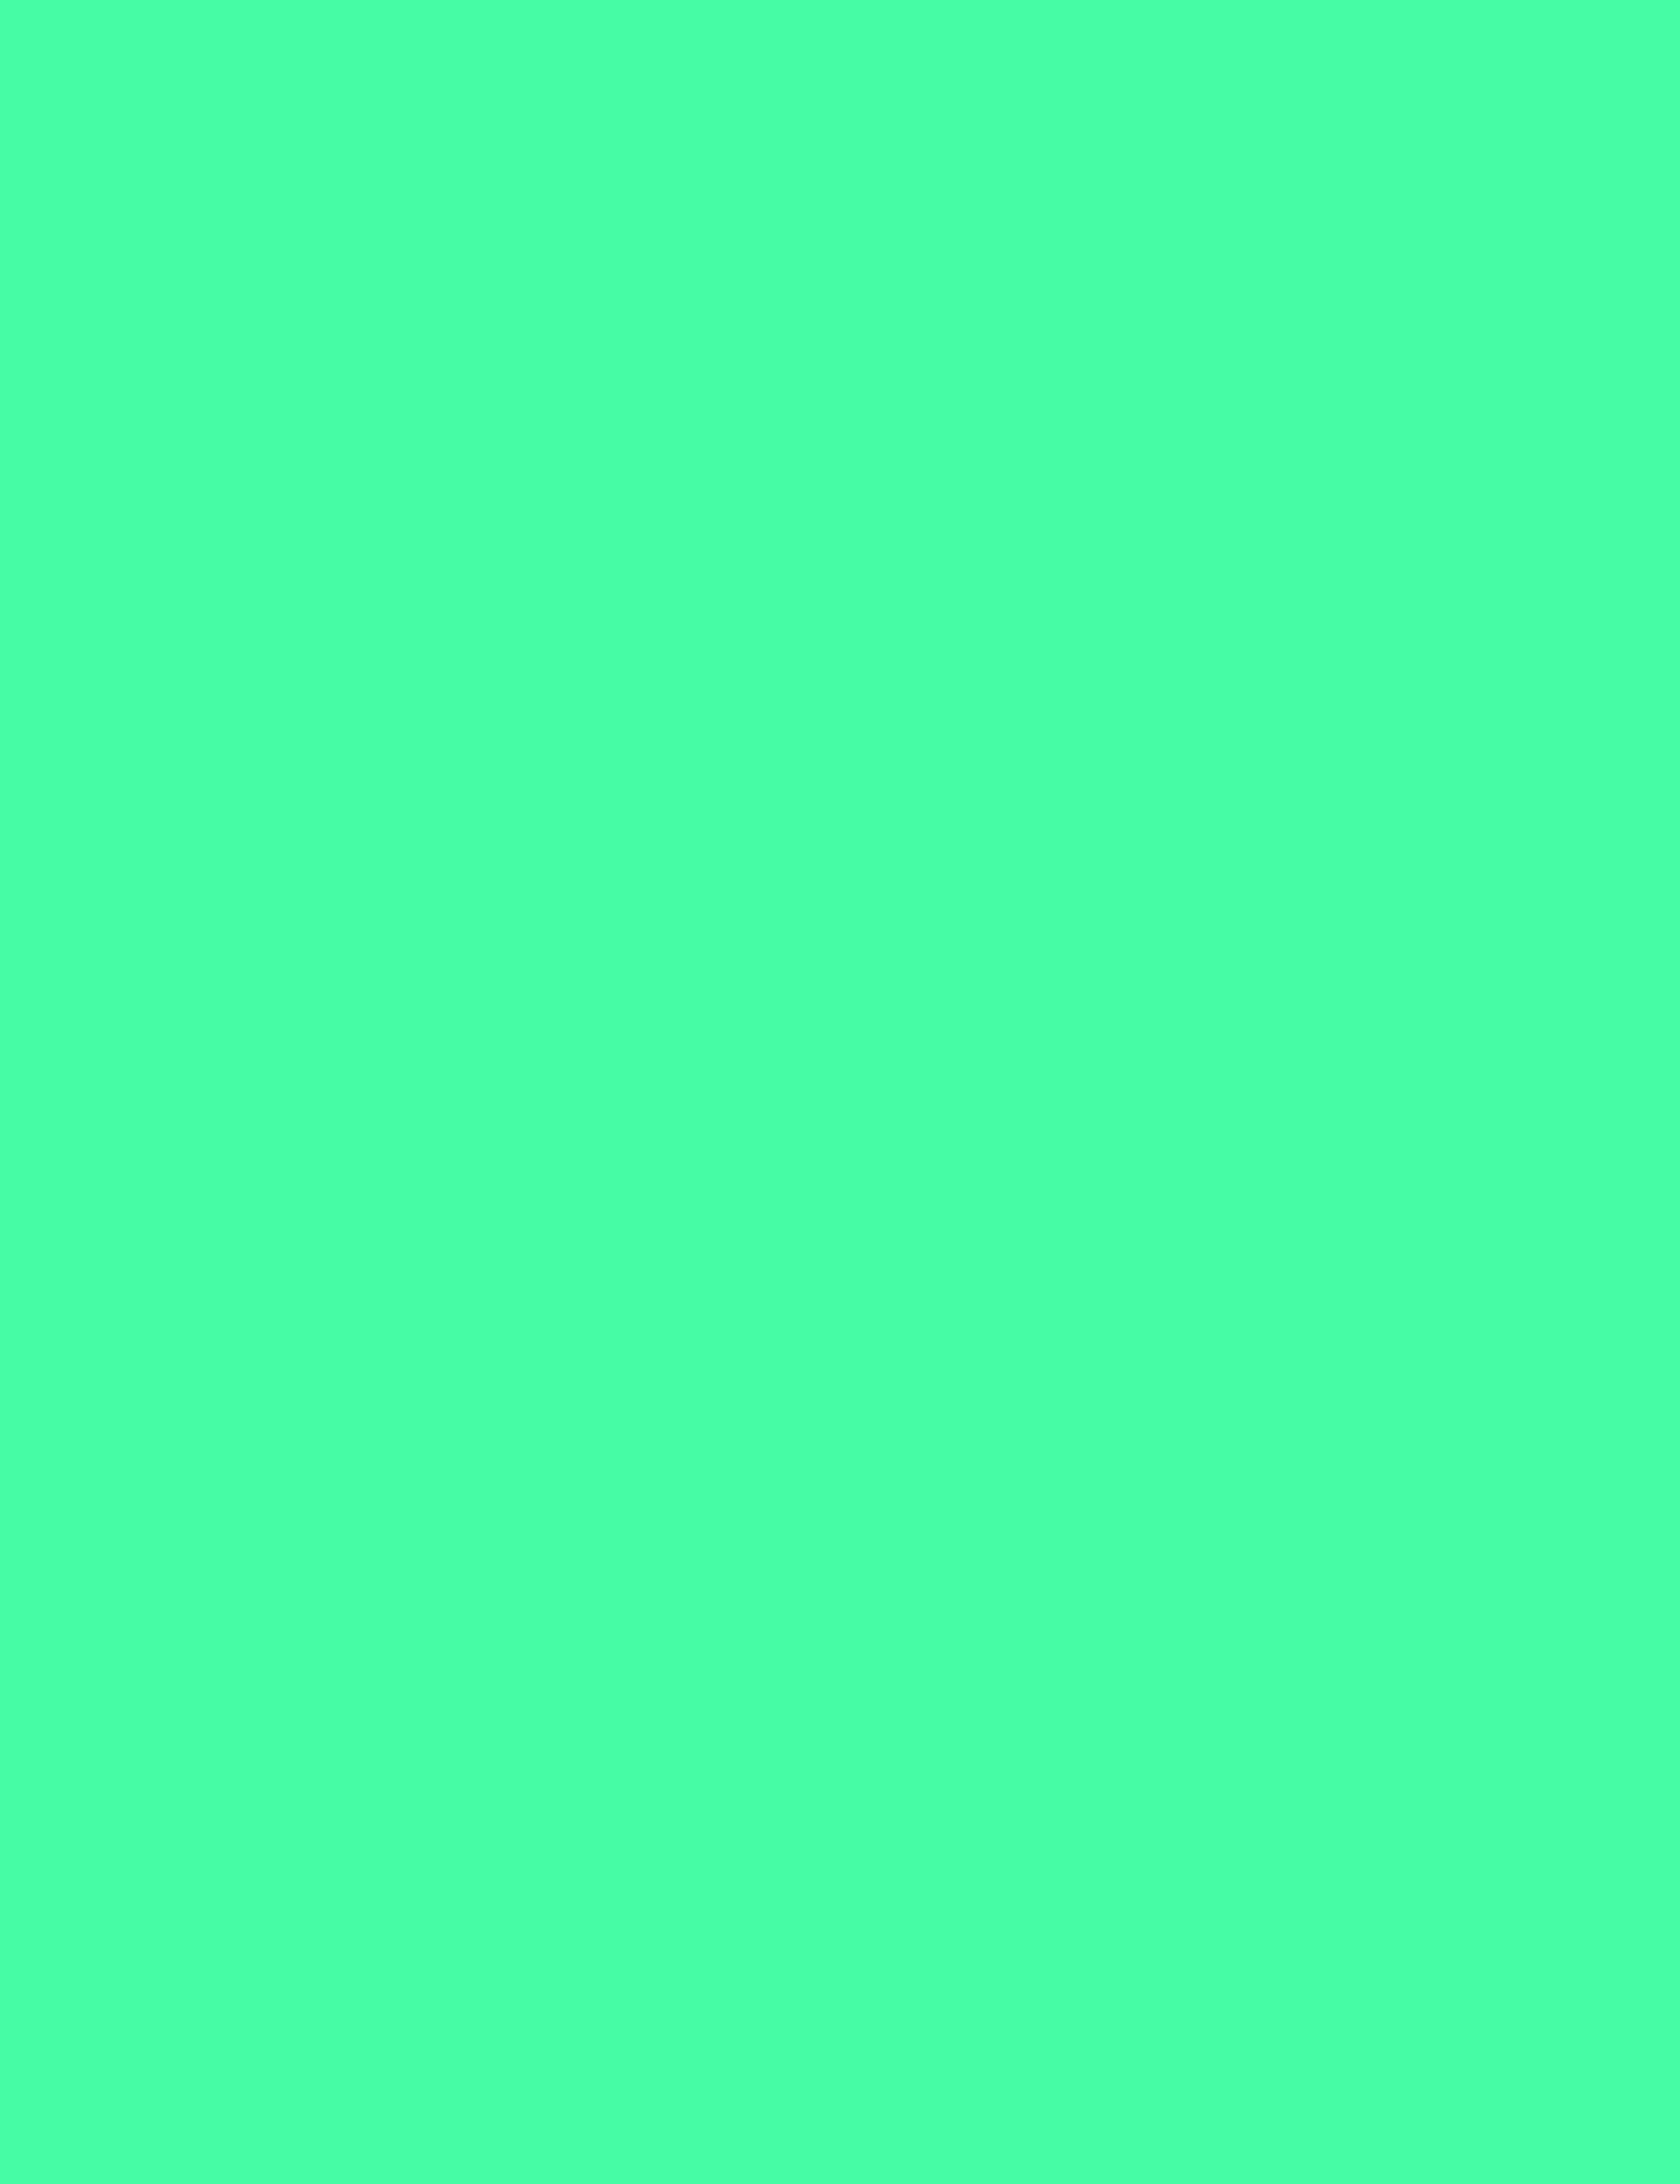 Turquoise Green Solid Fabric Photography Backdrop Shopbackdrop